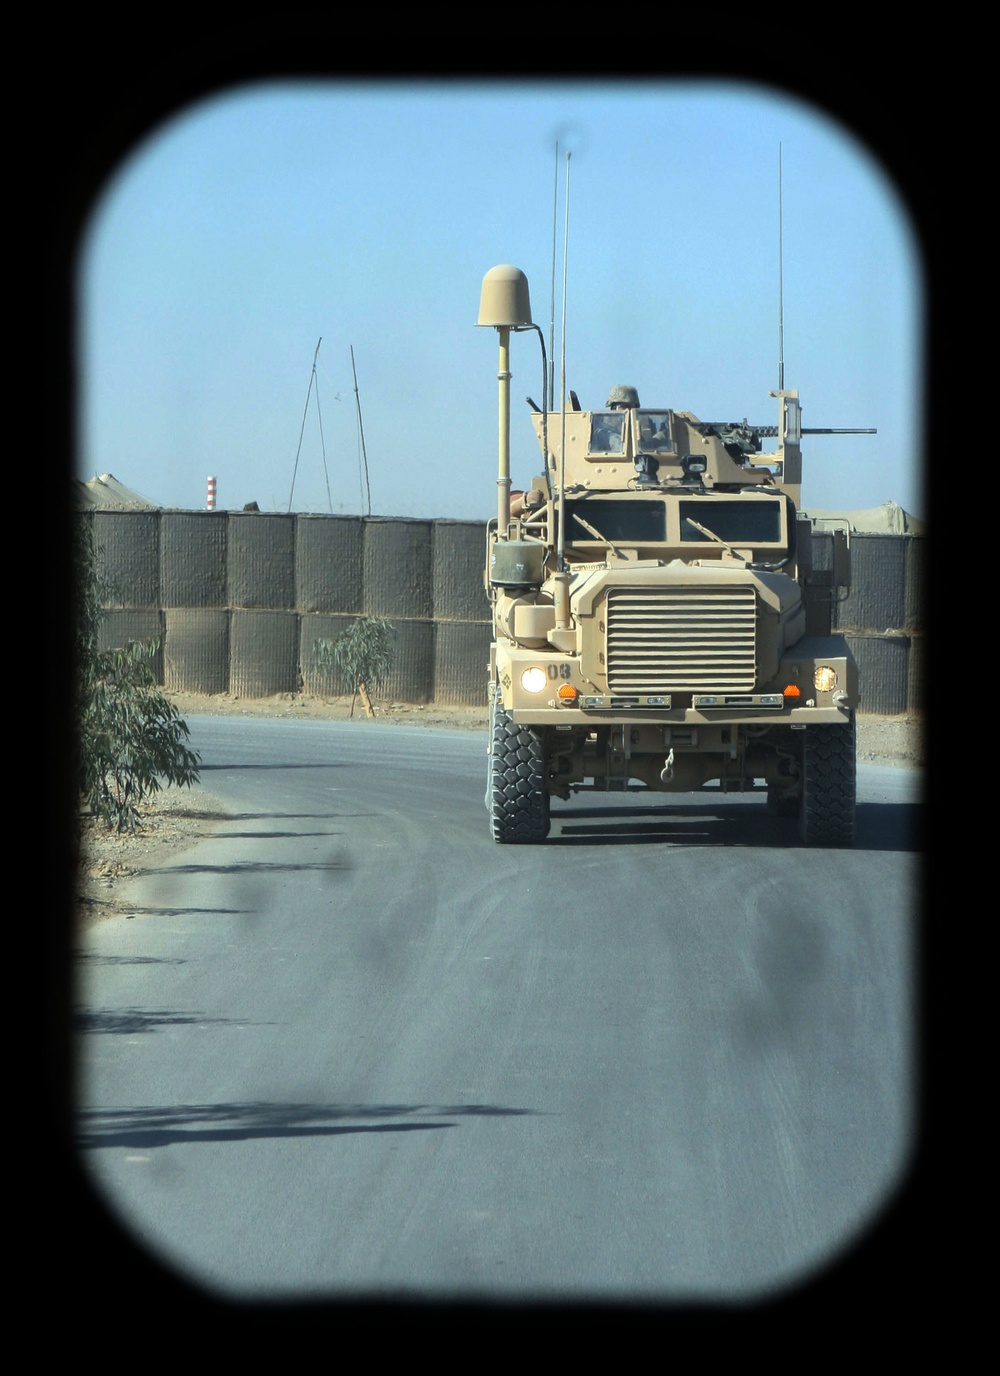 Combat Logistics Battalion - 3 provides convoy security, care to Afghan women's clinic